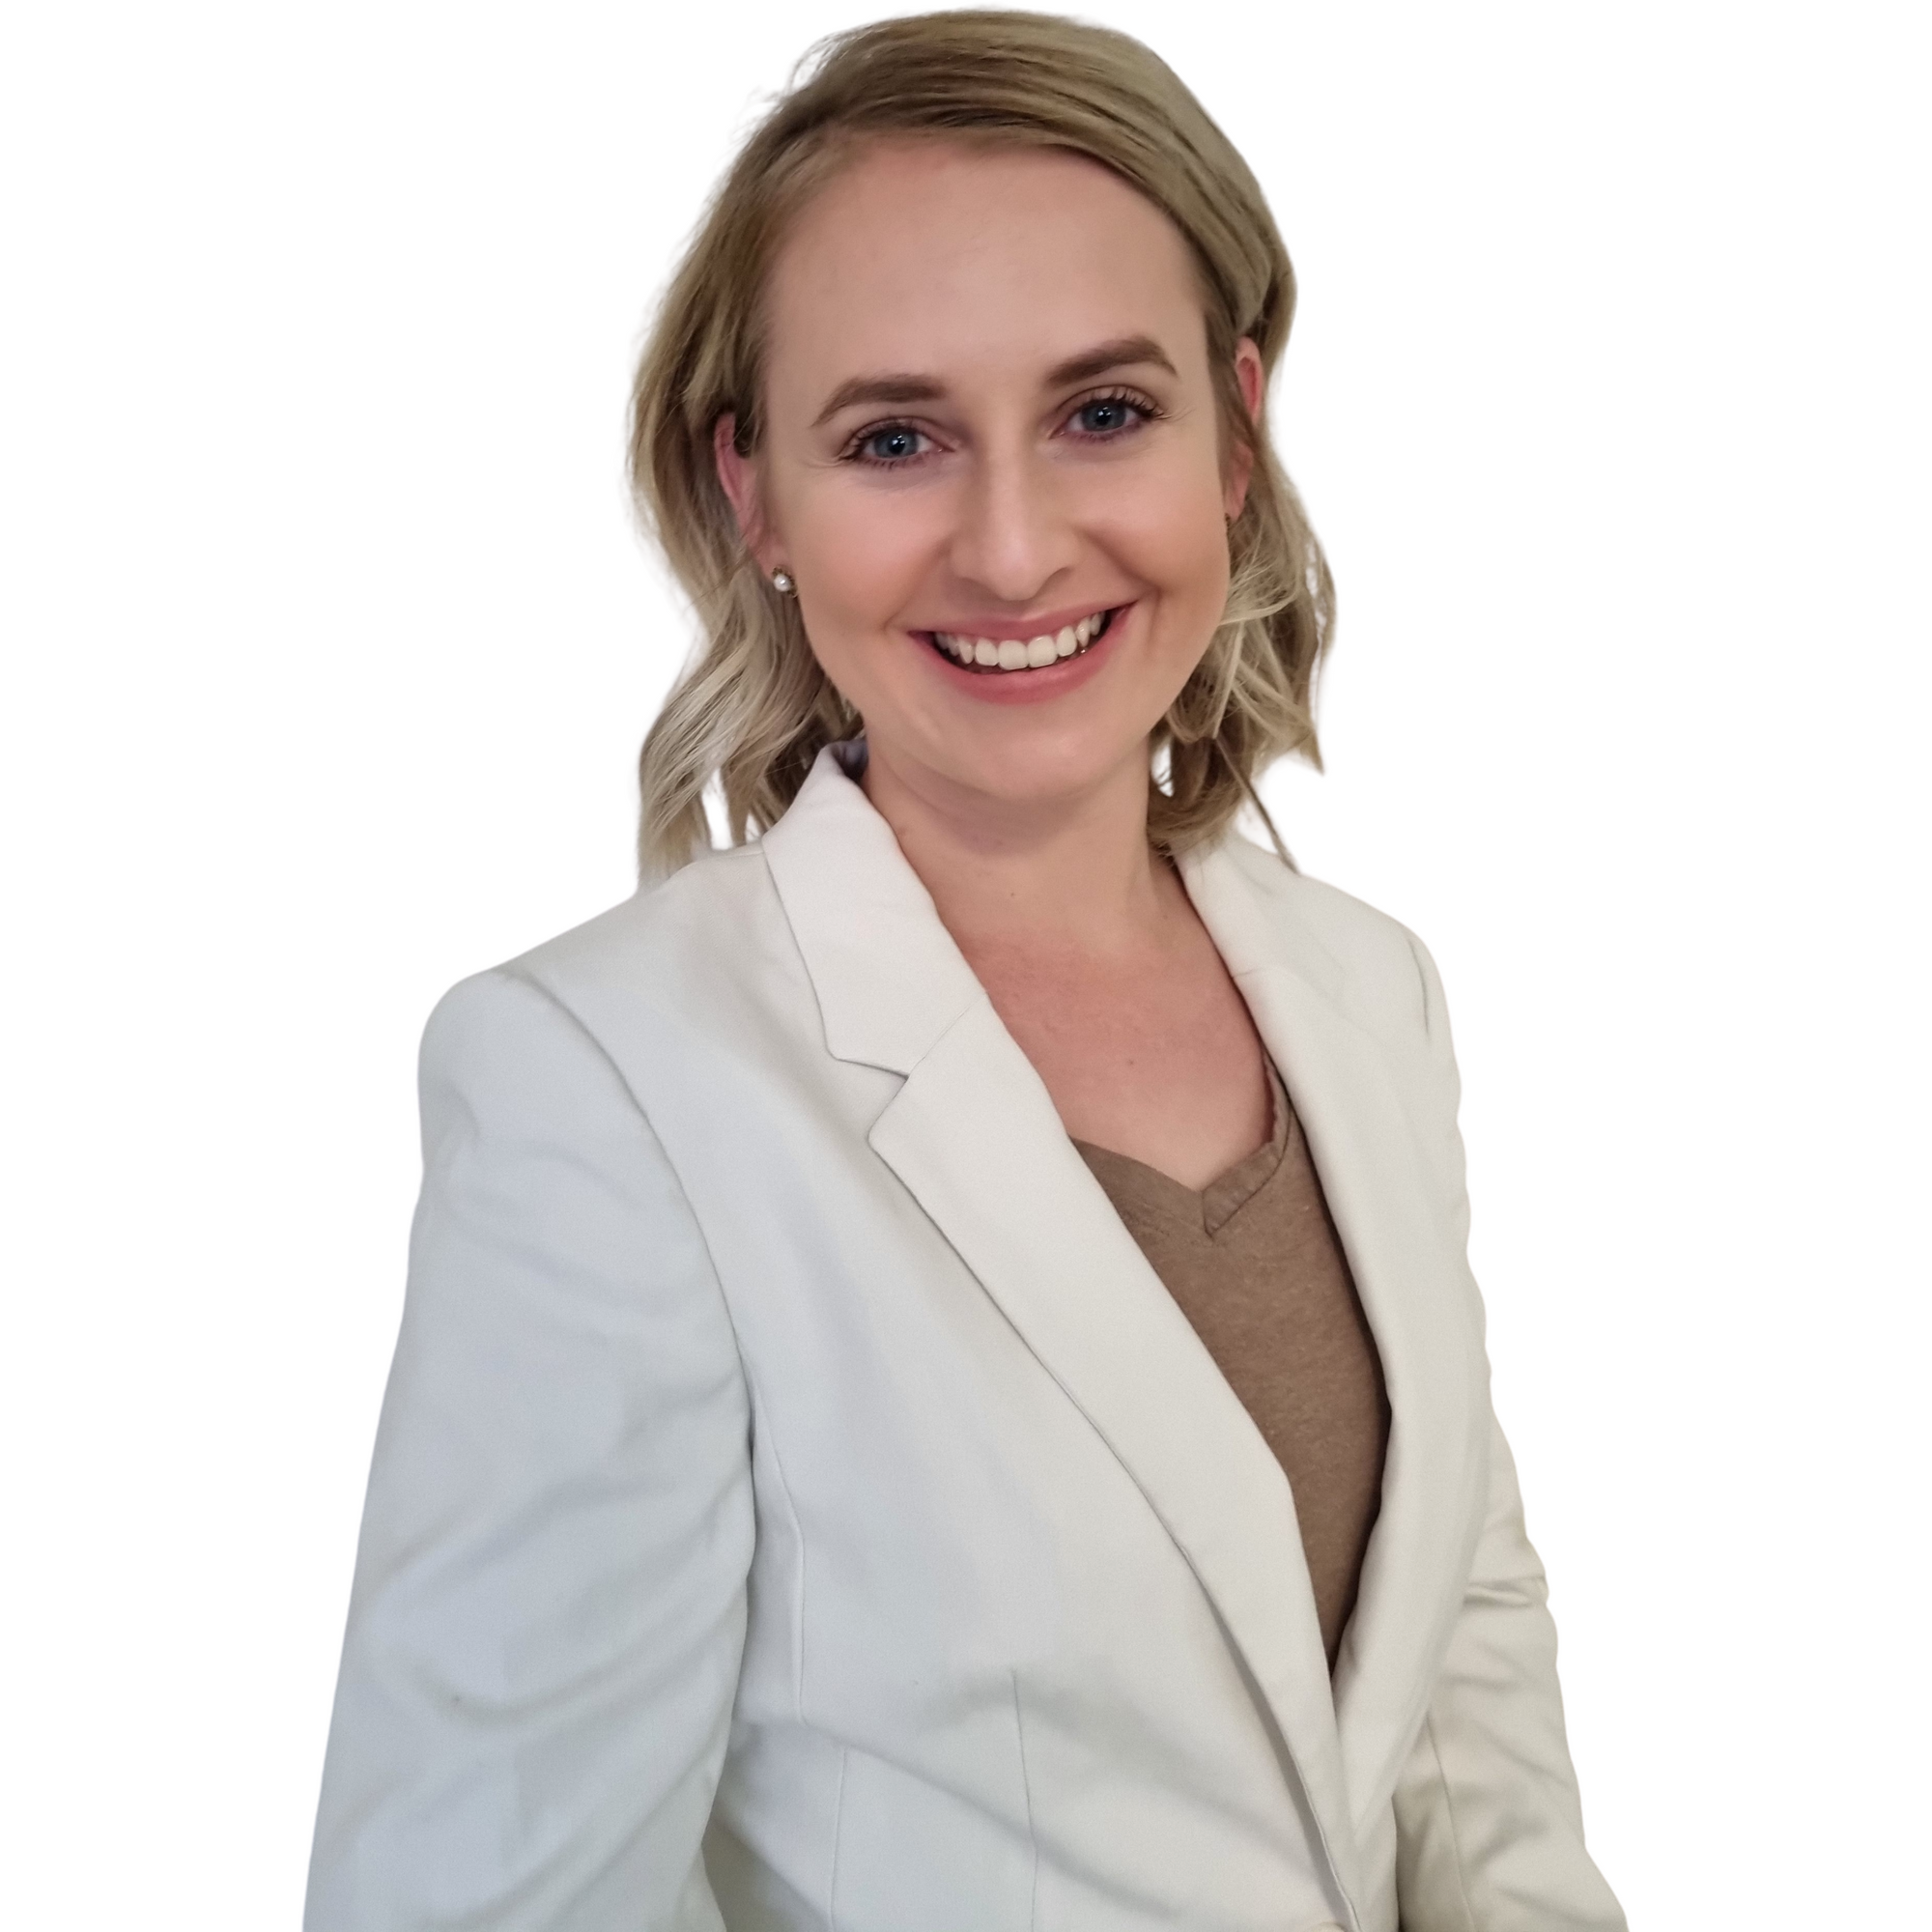 Dr Louisa Albertyn - Follow-up Consultation for 30 min - R1050